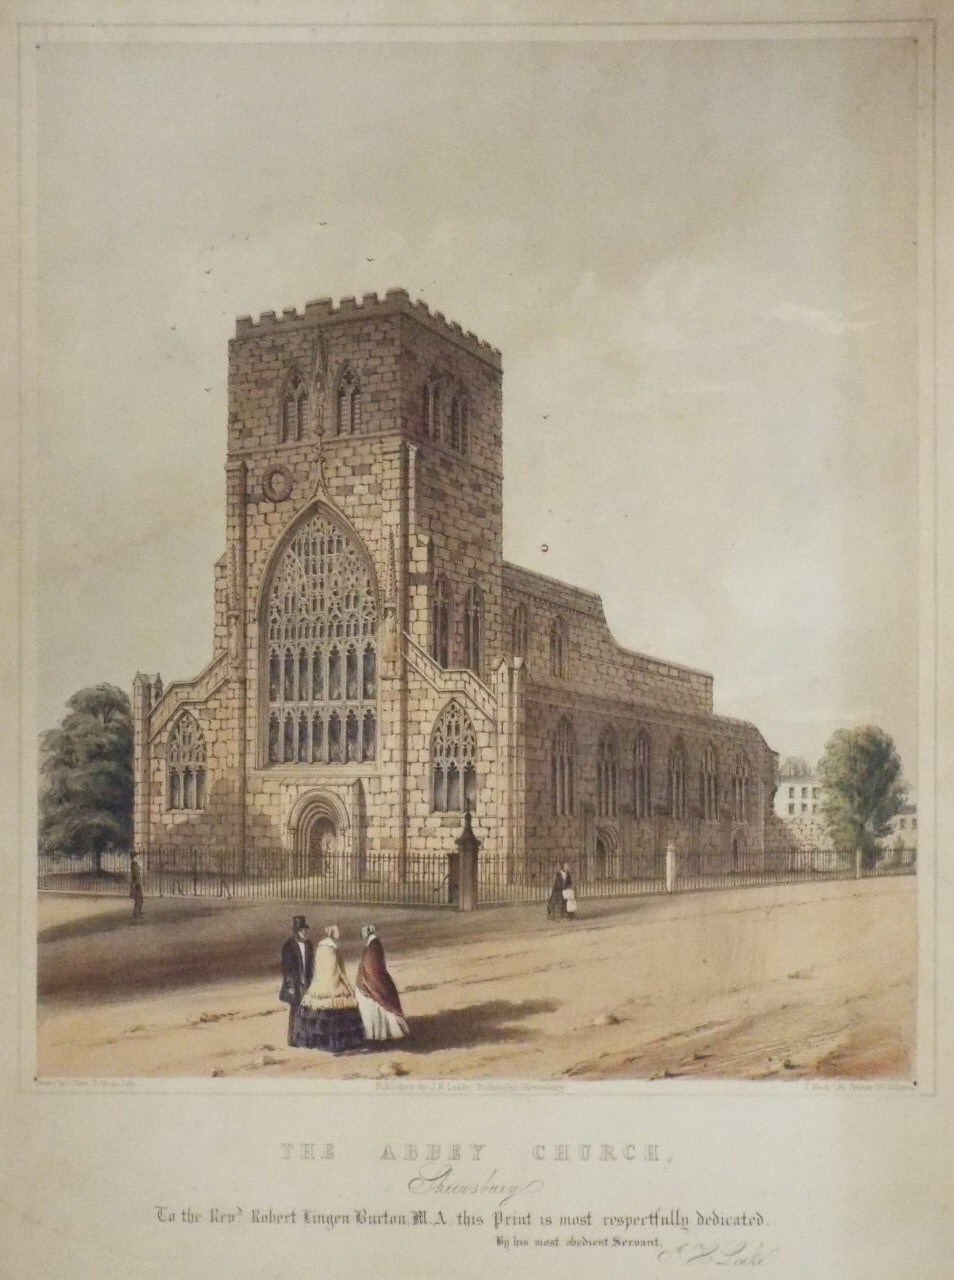 Lithograph - The Abbey Church, Shrewsbury. To the Revd. Robert Lingen Burton M.A. this Print is most respectfully dedicated, my his most obedient Servant J. H. Leake. - Groom